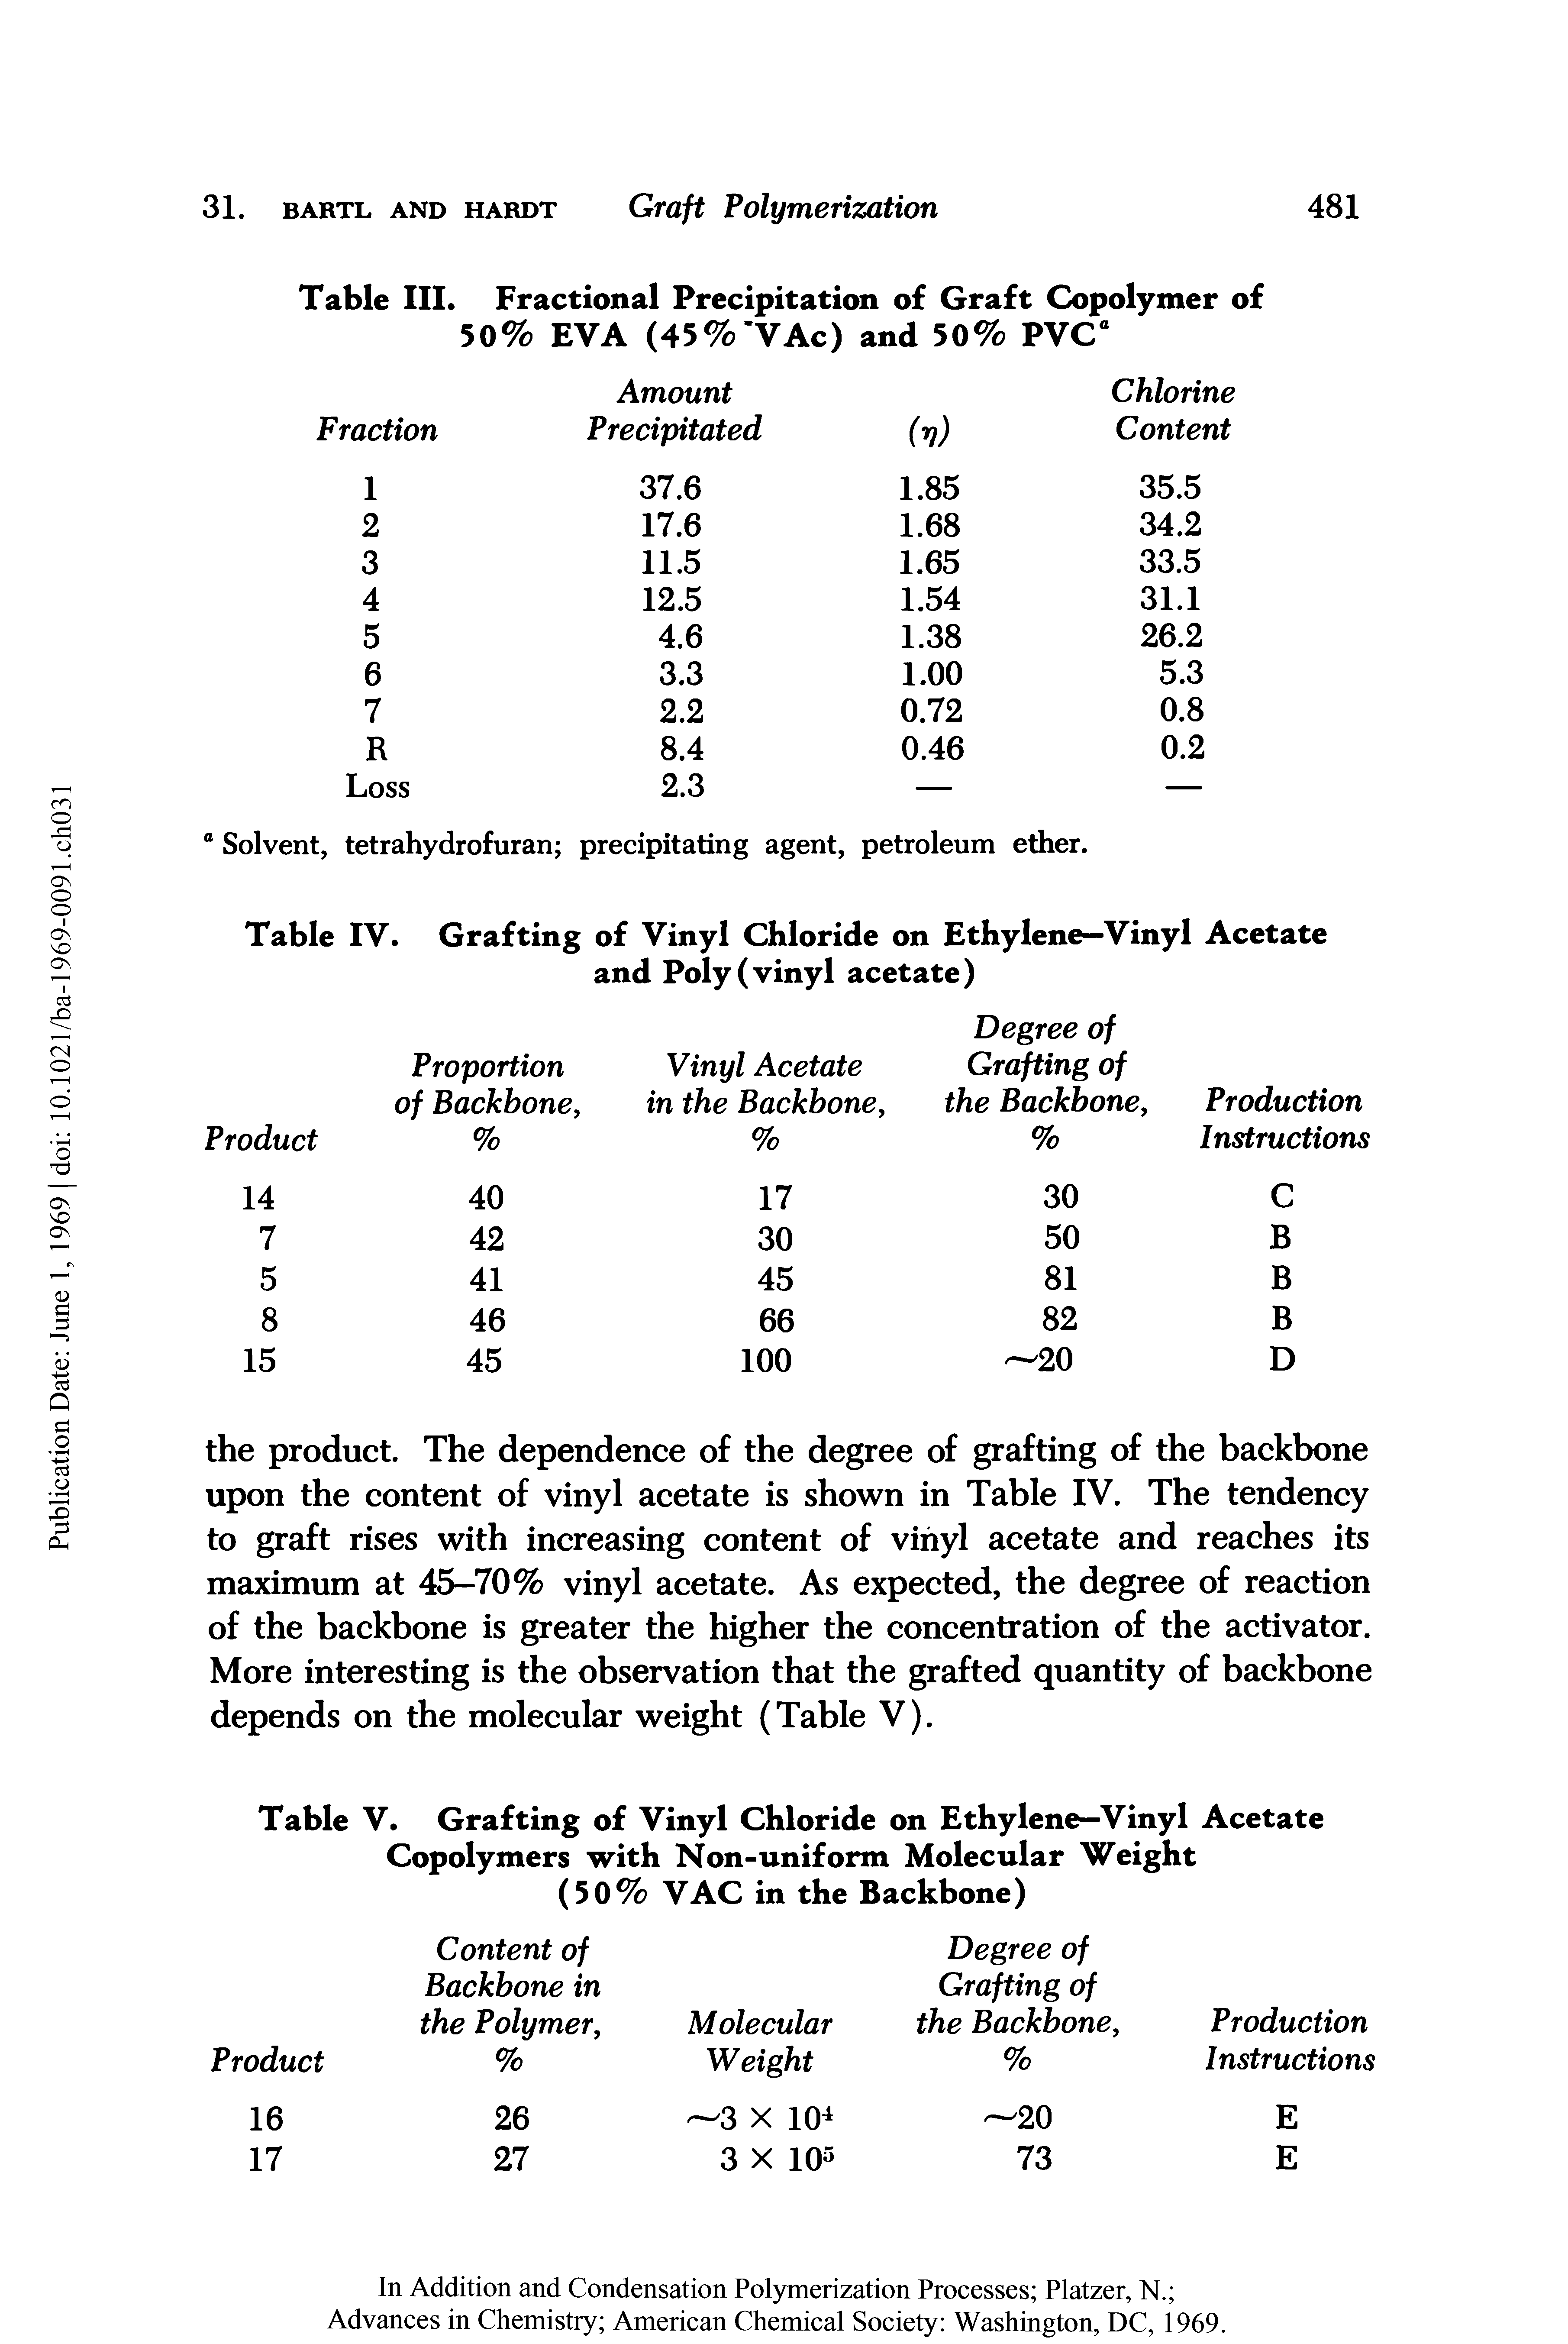 Table V. Grafting of Vinyl Chloride on Ethylene—Vinyl Acetate Copolymers with Non-uniform Molecular Weight (50% VAC in the Backbone)...